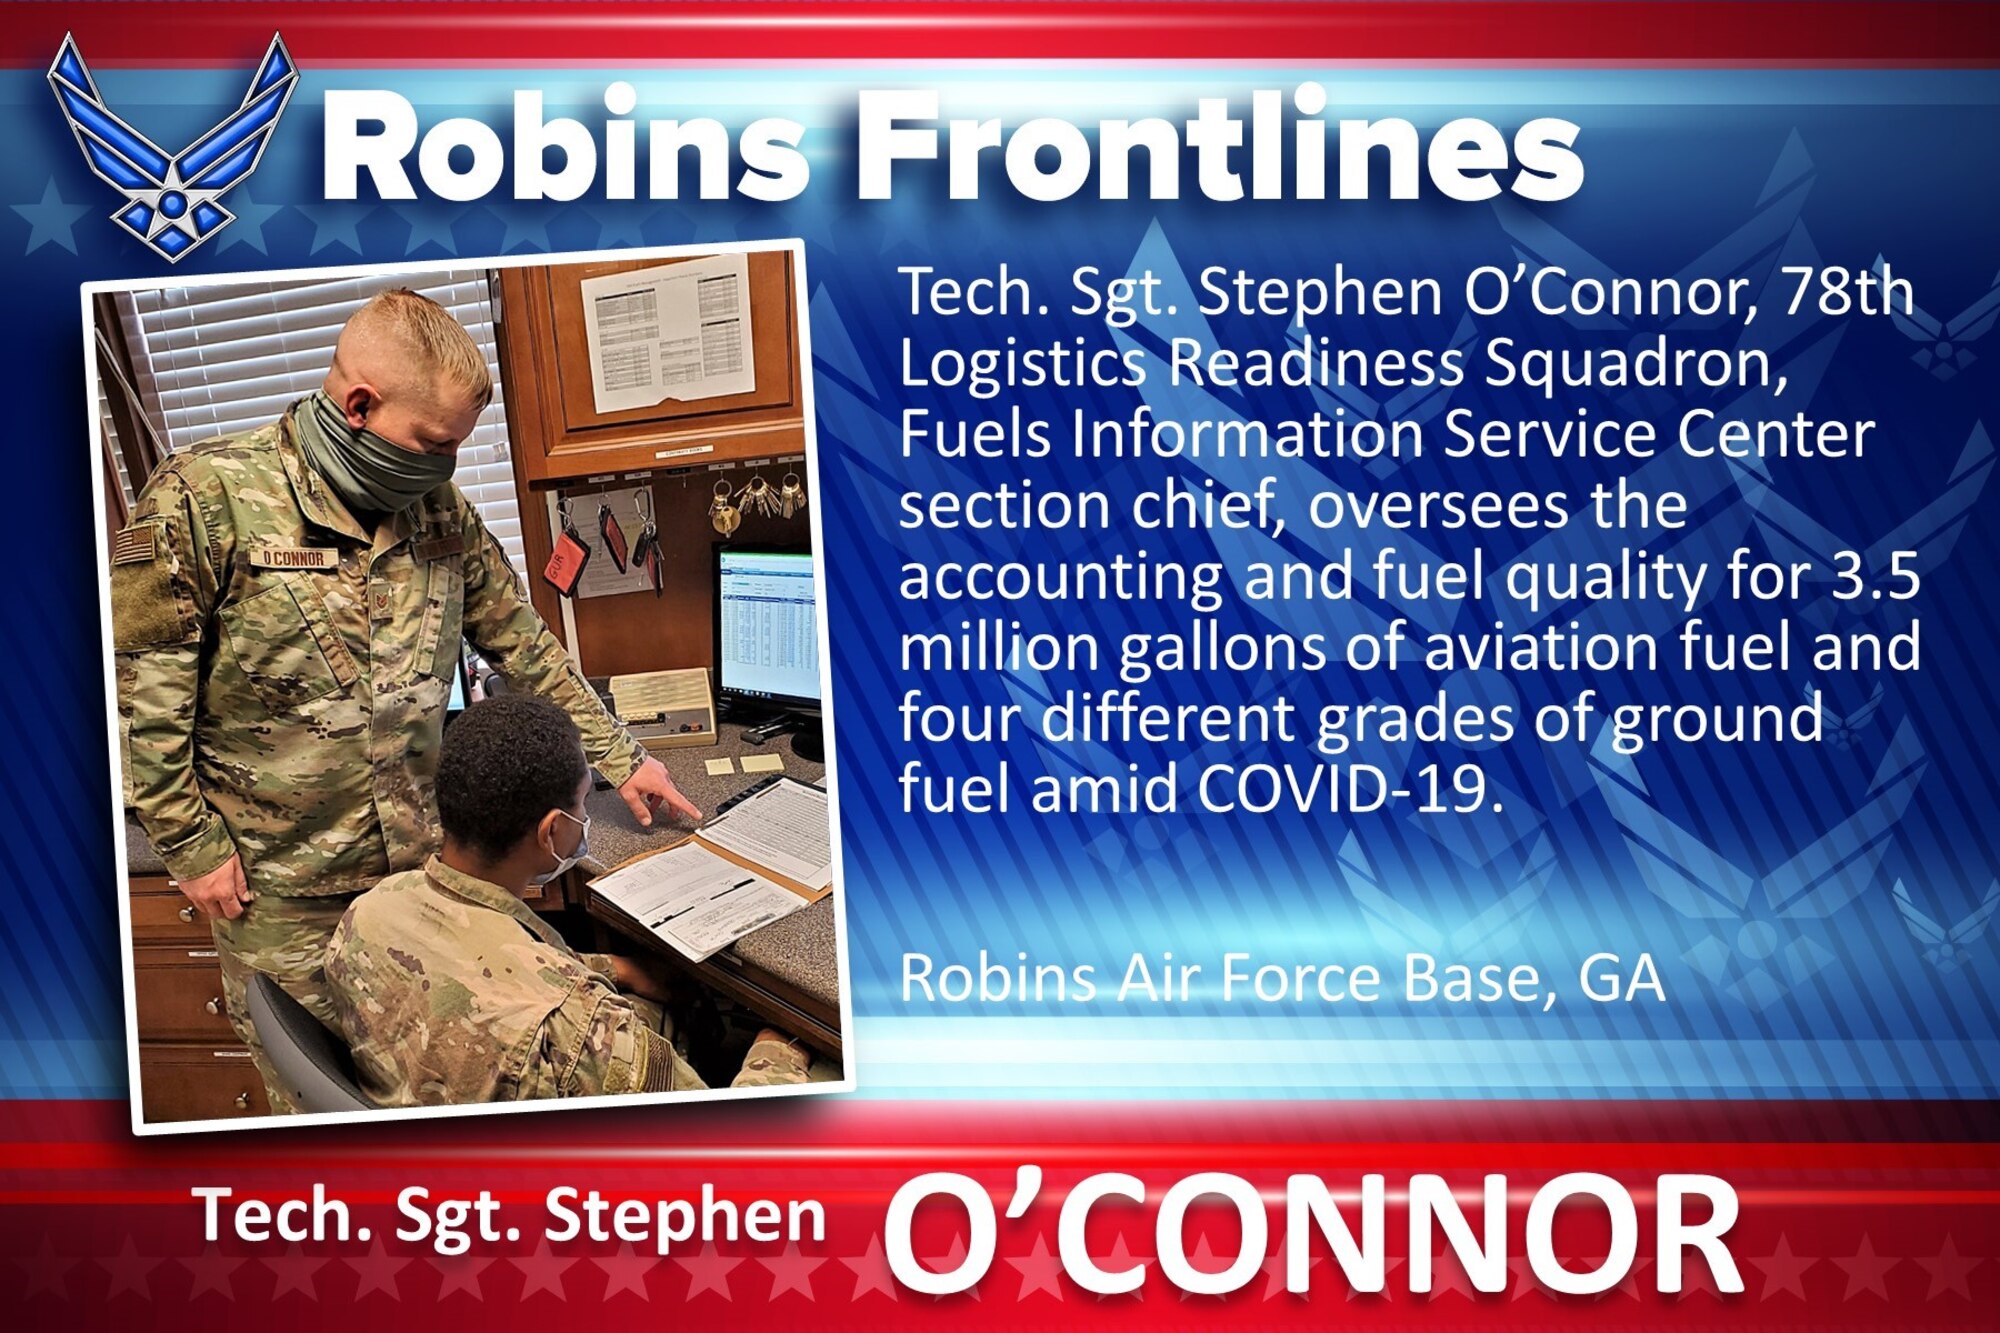 Robins Frontlines: Tech. Sgt. Stephen O'Connor